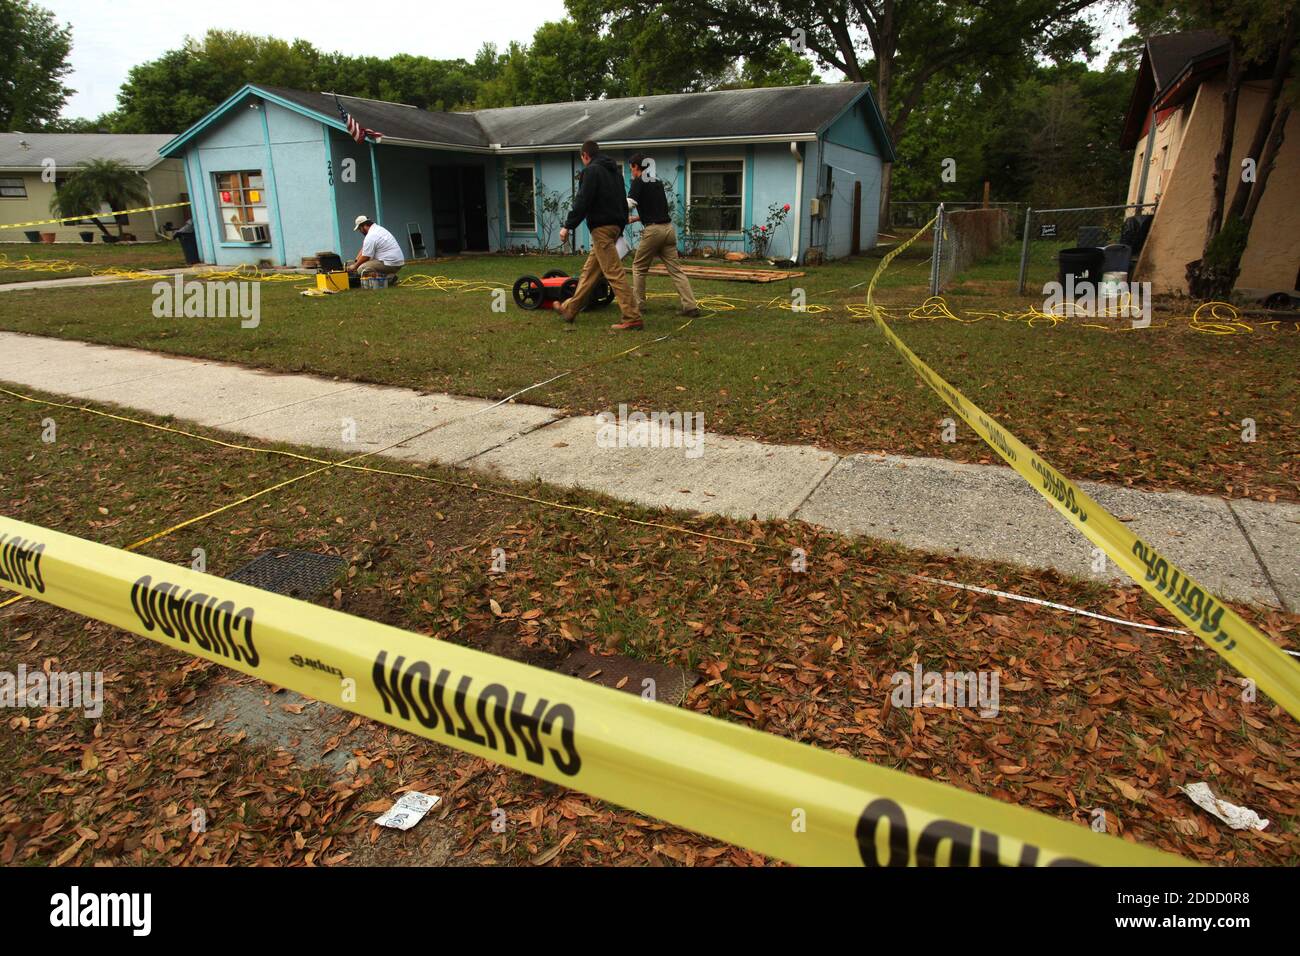 NO FILM, NO VIDEO, NO TV, NO DOCUMENTARY - Engineers access the situation at 240 Faithway Drive in Seffner, Florida, Friday, March 1, 2013. A Florida man was feared dead after a sinkhole suddenly opened up under the bedroom of his suburban Tampa home and swallowed him, police and fire officials said. Rescuers responded to a 911 call late on Thursday after the family of Jeff Bush, 36, reported hearing a loud crash in the house and rushed to his bedroom. Photo by Skip O'Rourke/Tampa Bay Times/MCT/ABACAPRESS.COM Stock Photo